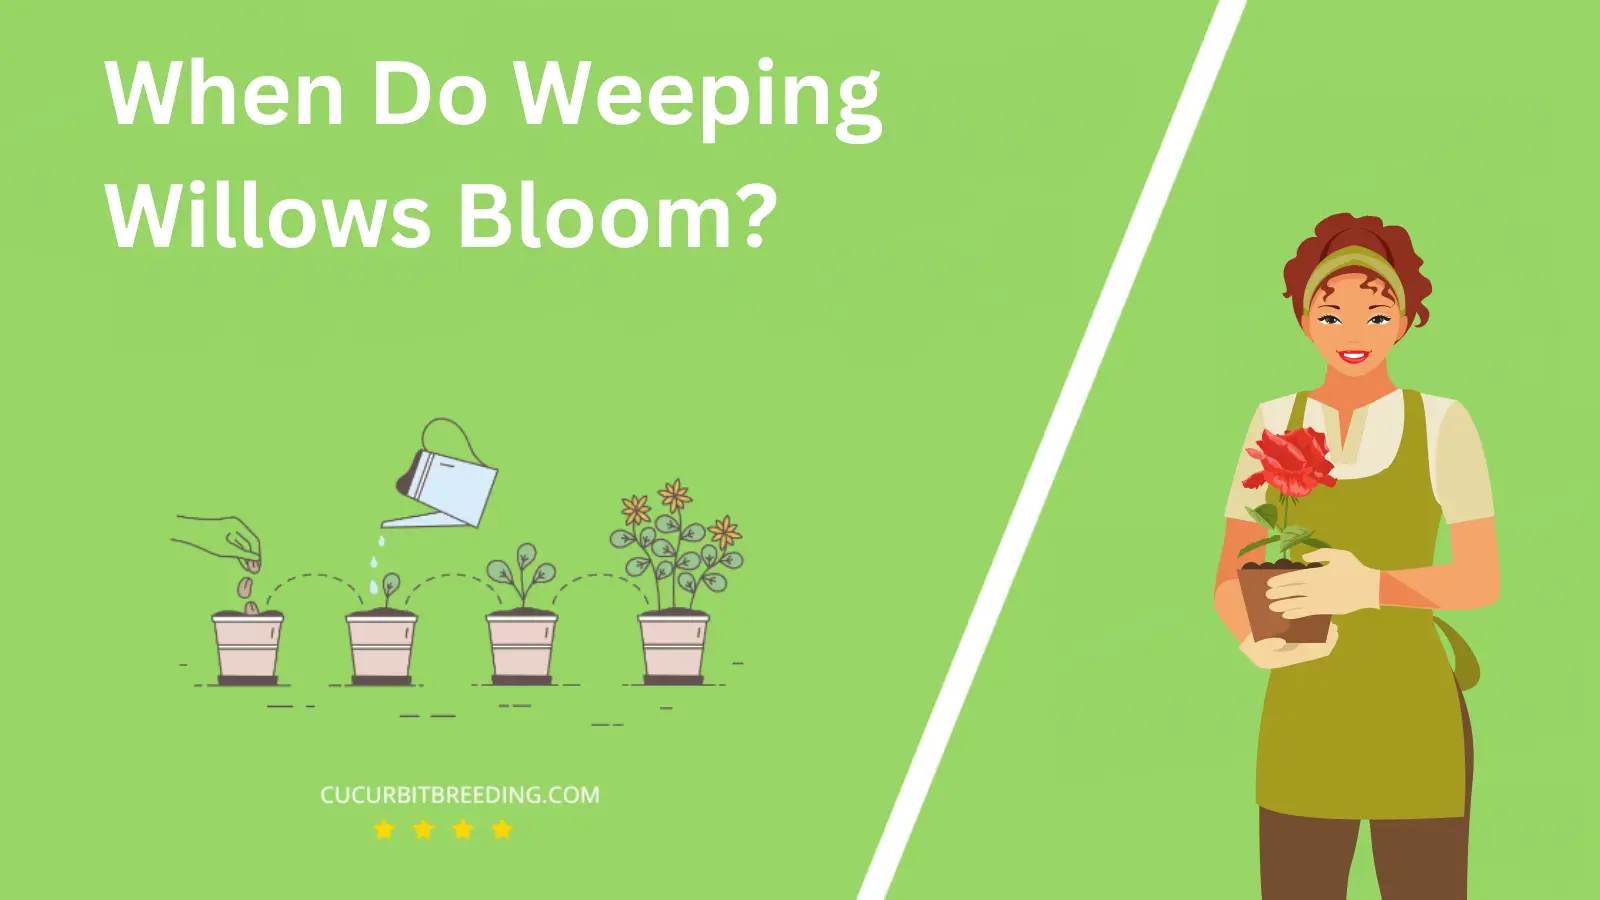 When Do Weeping Willows Bloom?